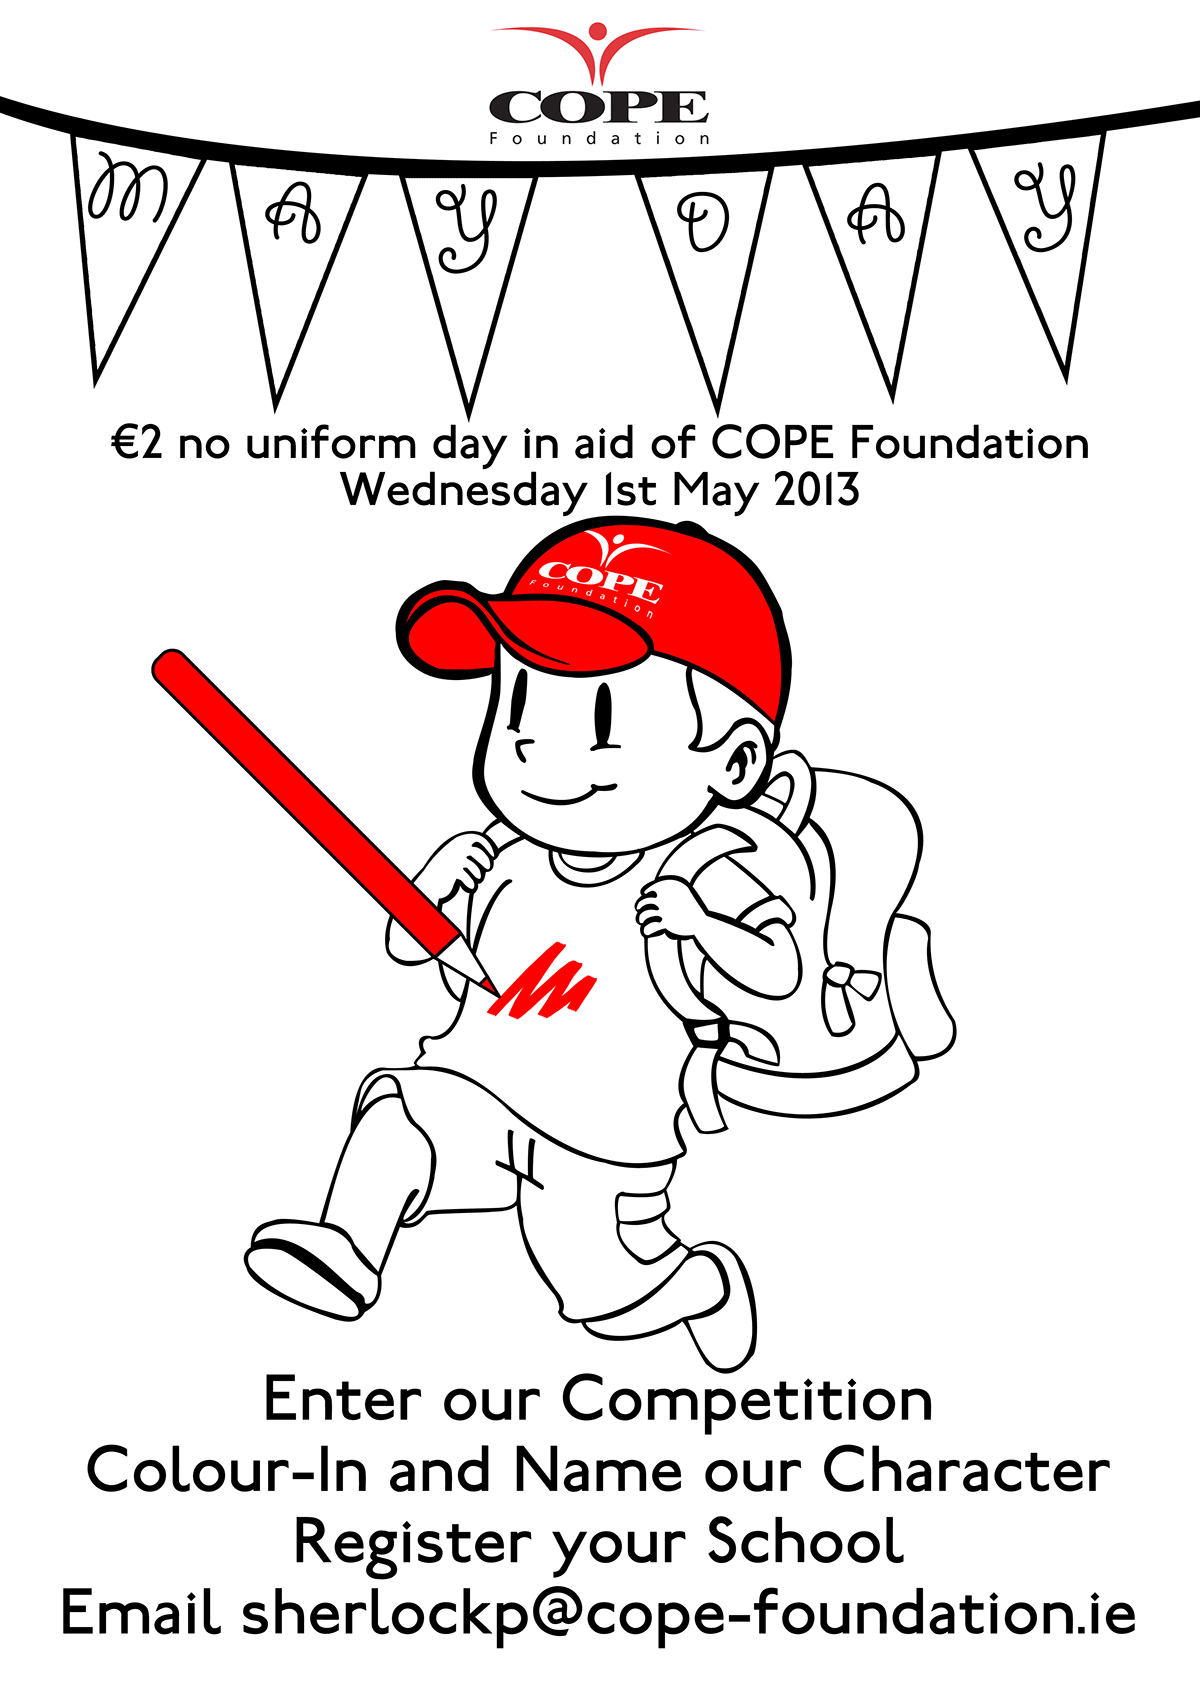 Cope foundation fundraising poster COLOURING charity May Day